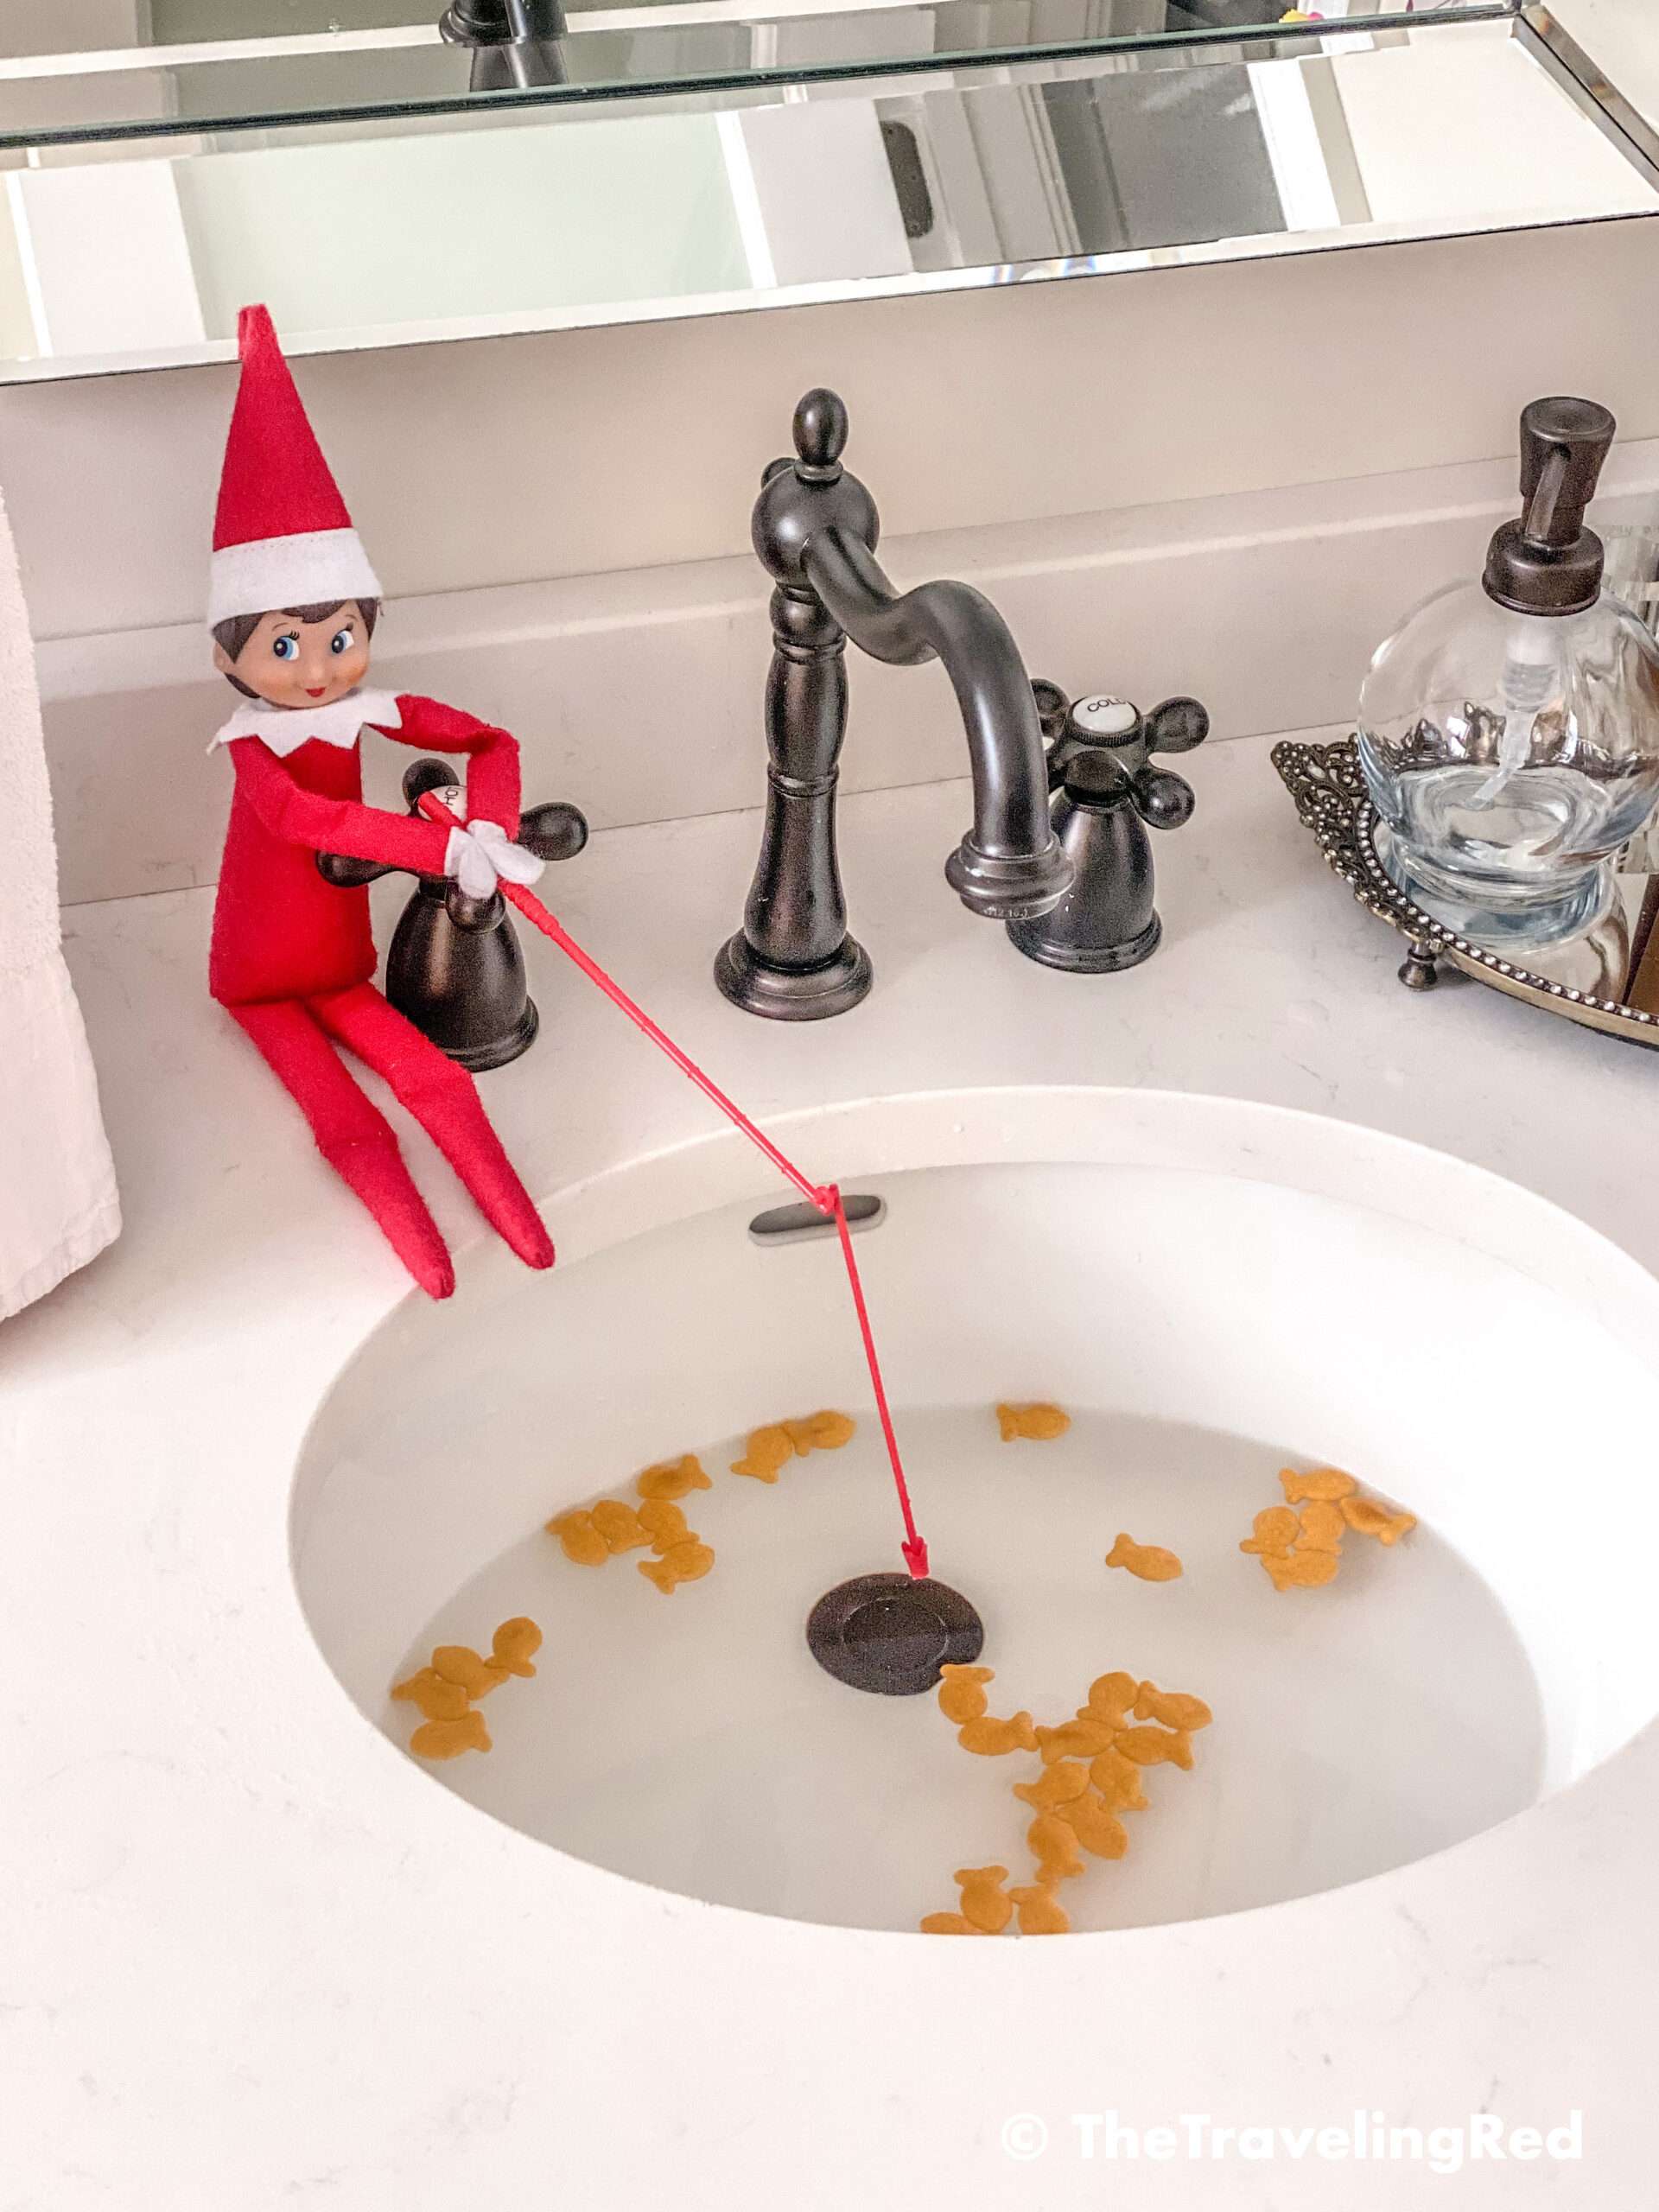 Naughty Elf on the shelf fishing in the sink for goldfish crackers. Fun and easy elf on the shelf ideas for a naughty elf that are quick and easy using things you have at home.